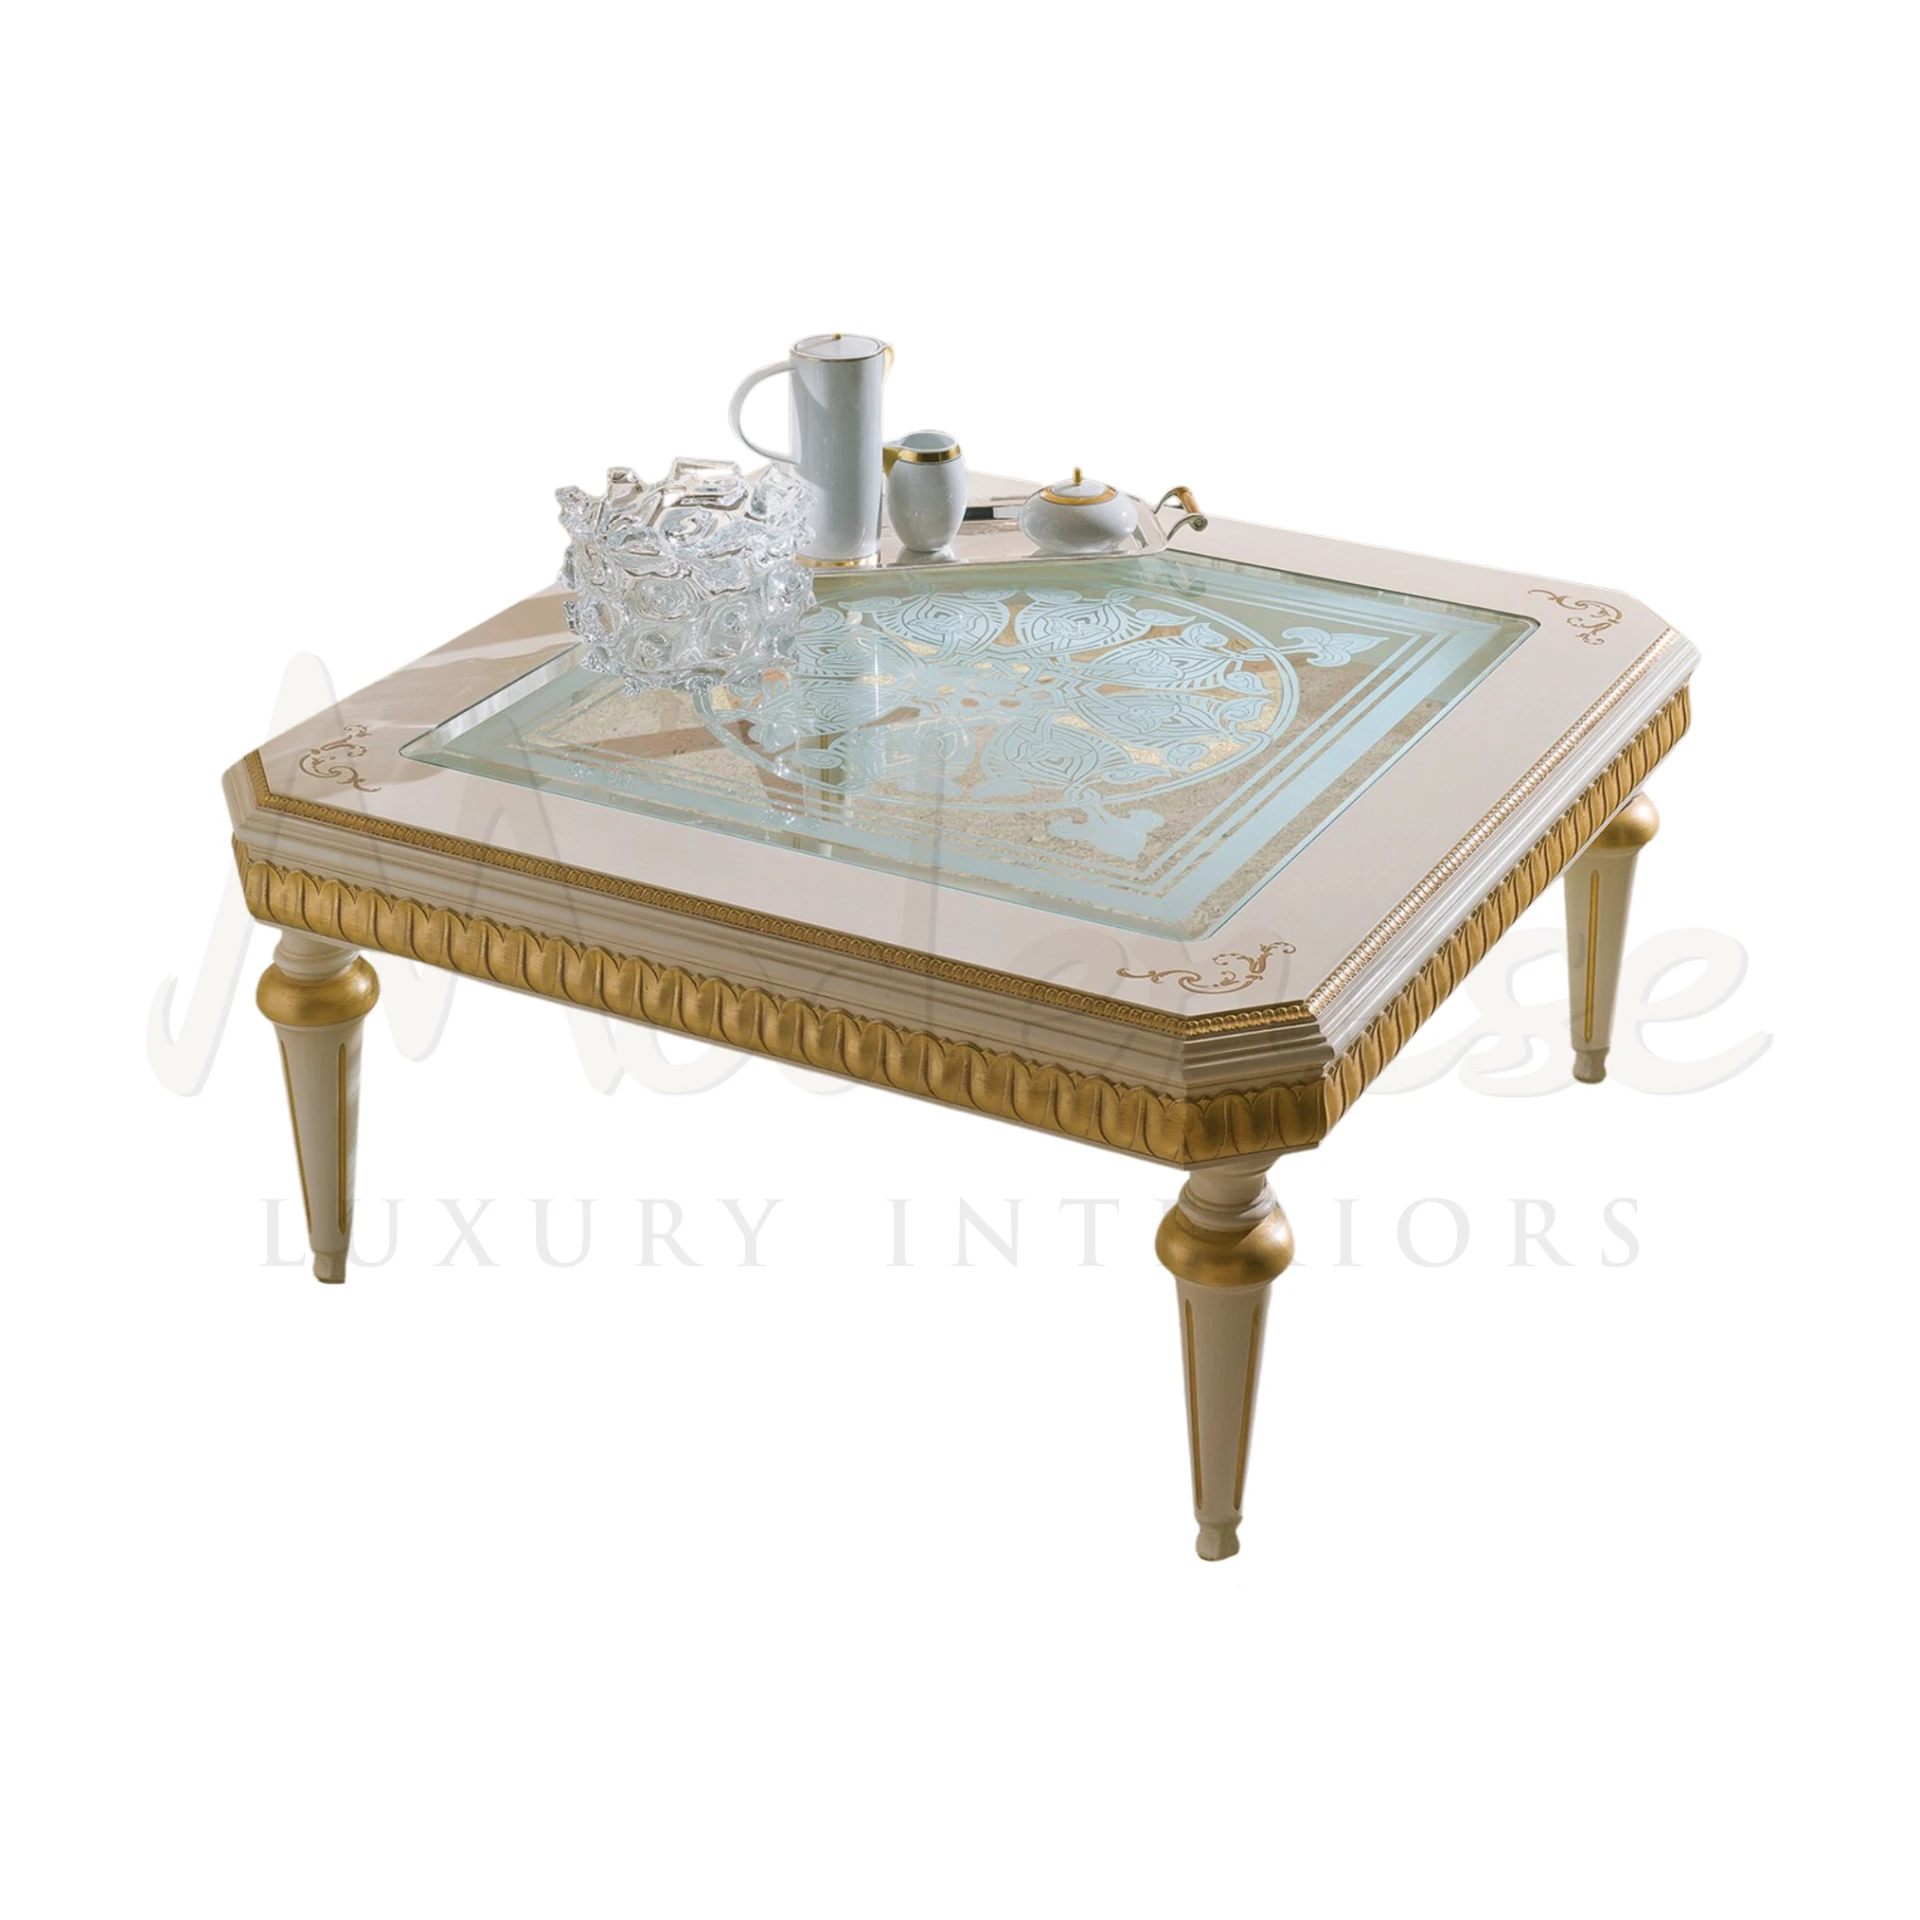 "Square Coffee Table with solid wood and gold leaf accents, epitomizing luxury furniture and Italian design craftsmanship.